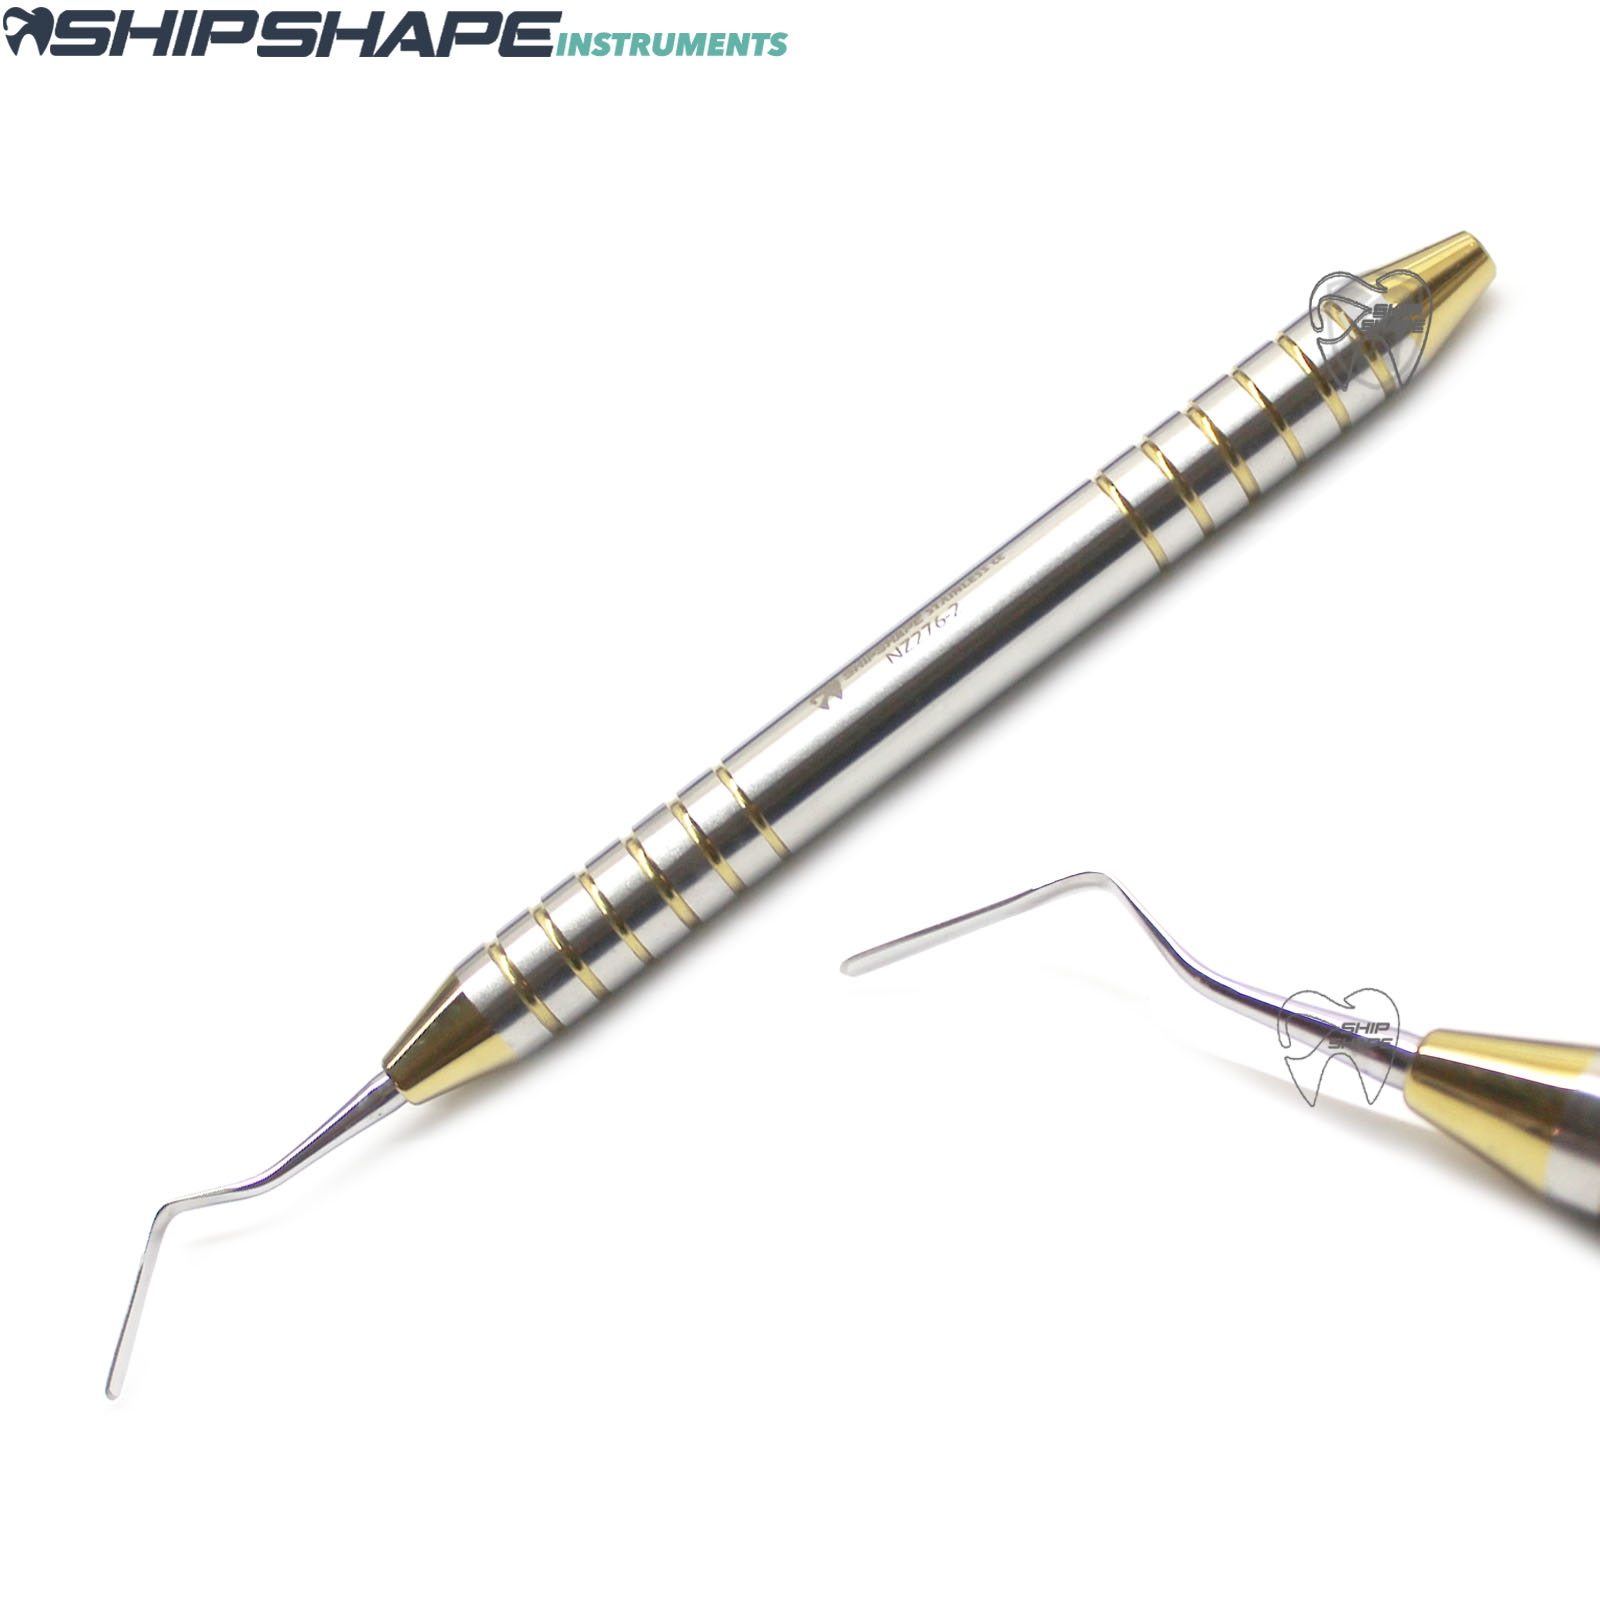 Periotome Scaler Set Of 4 Dental Periotomes Scaler PDL Periodontal Ligament Atraumatic Extraction Instruments SS*-1043